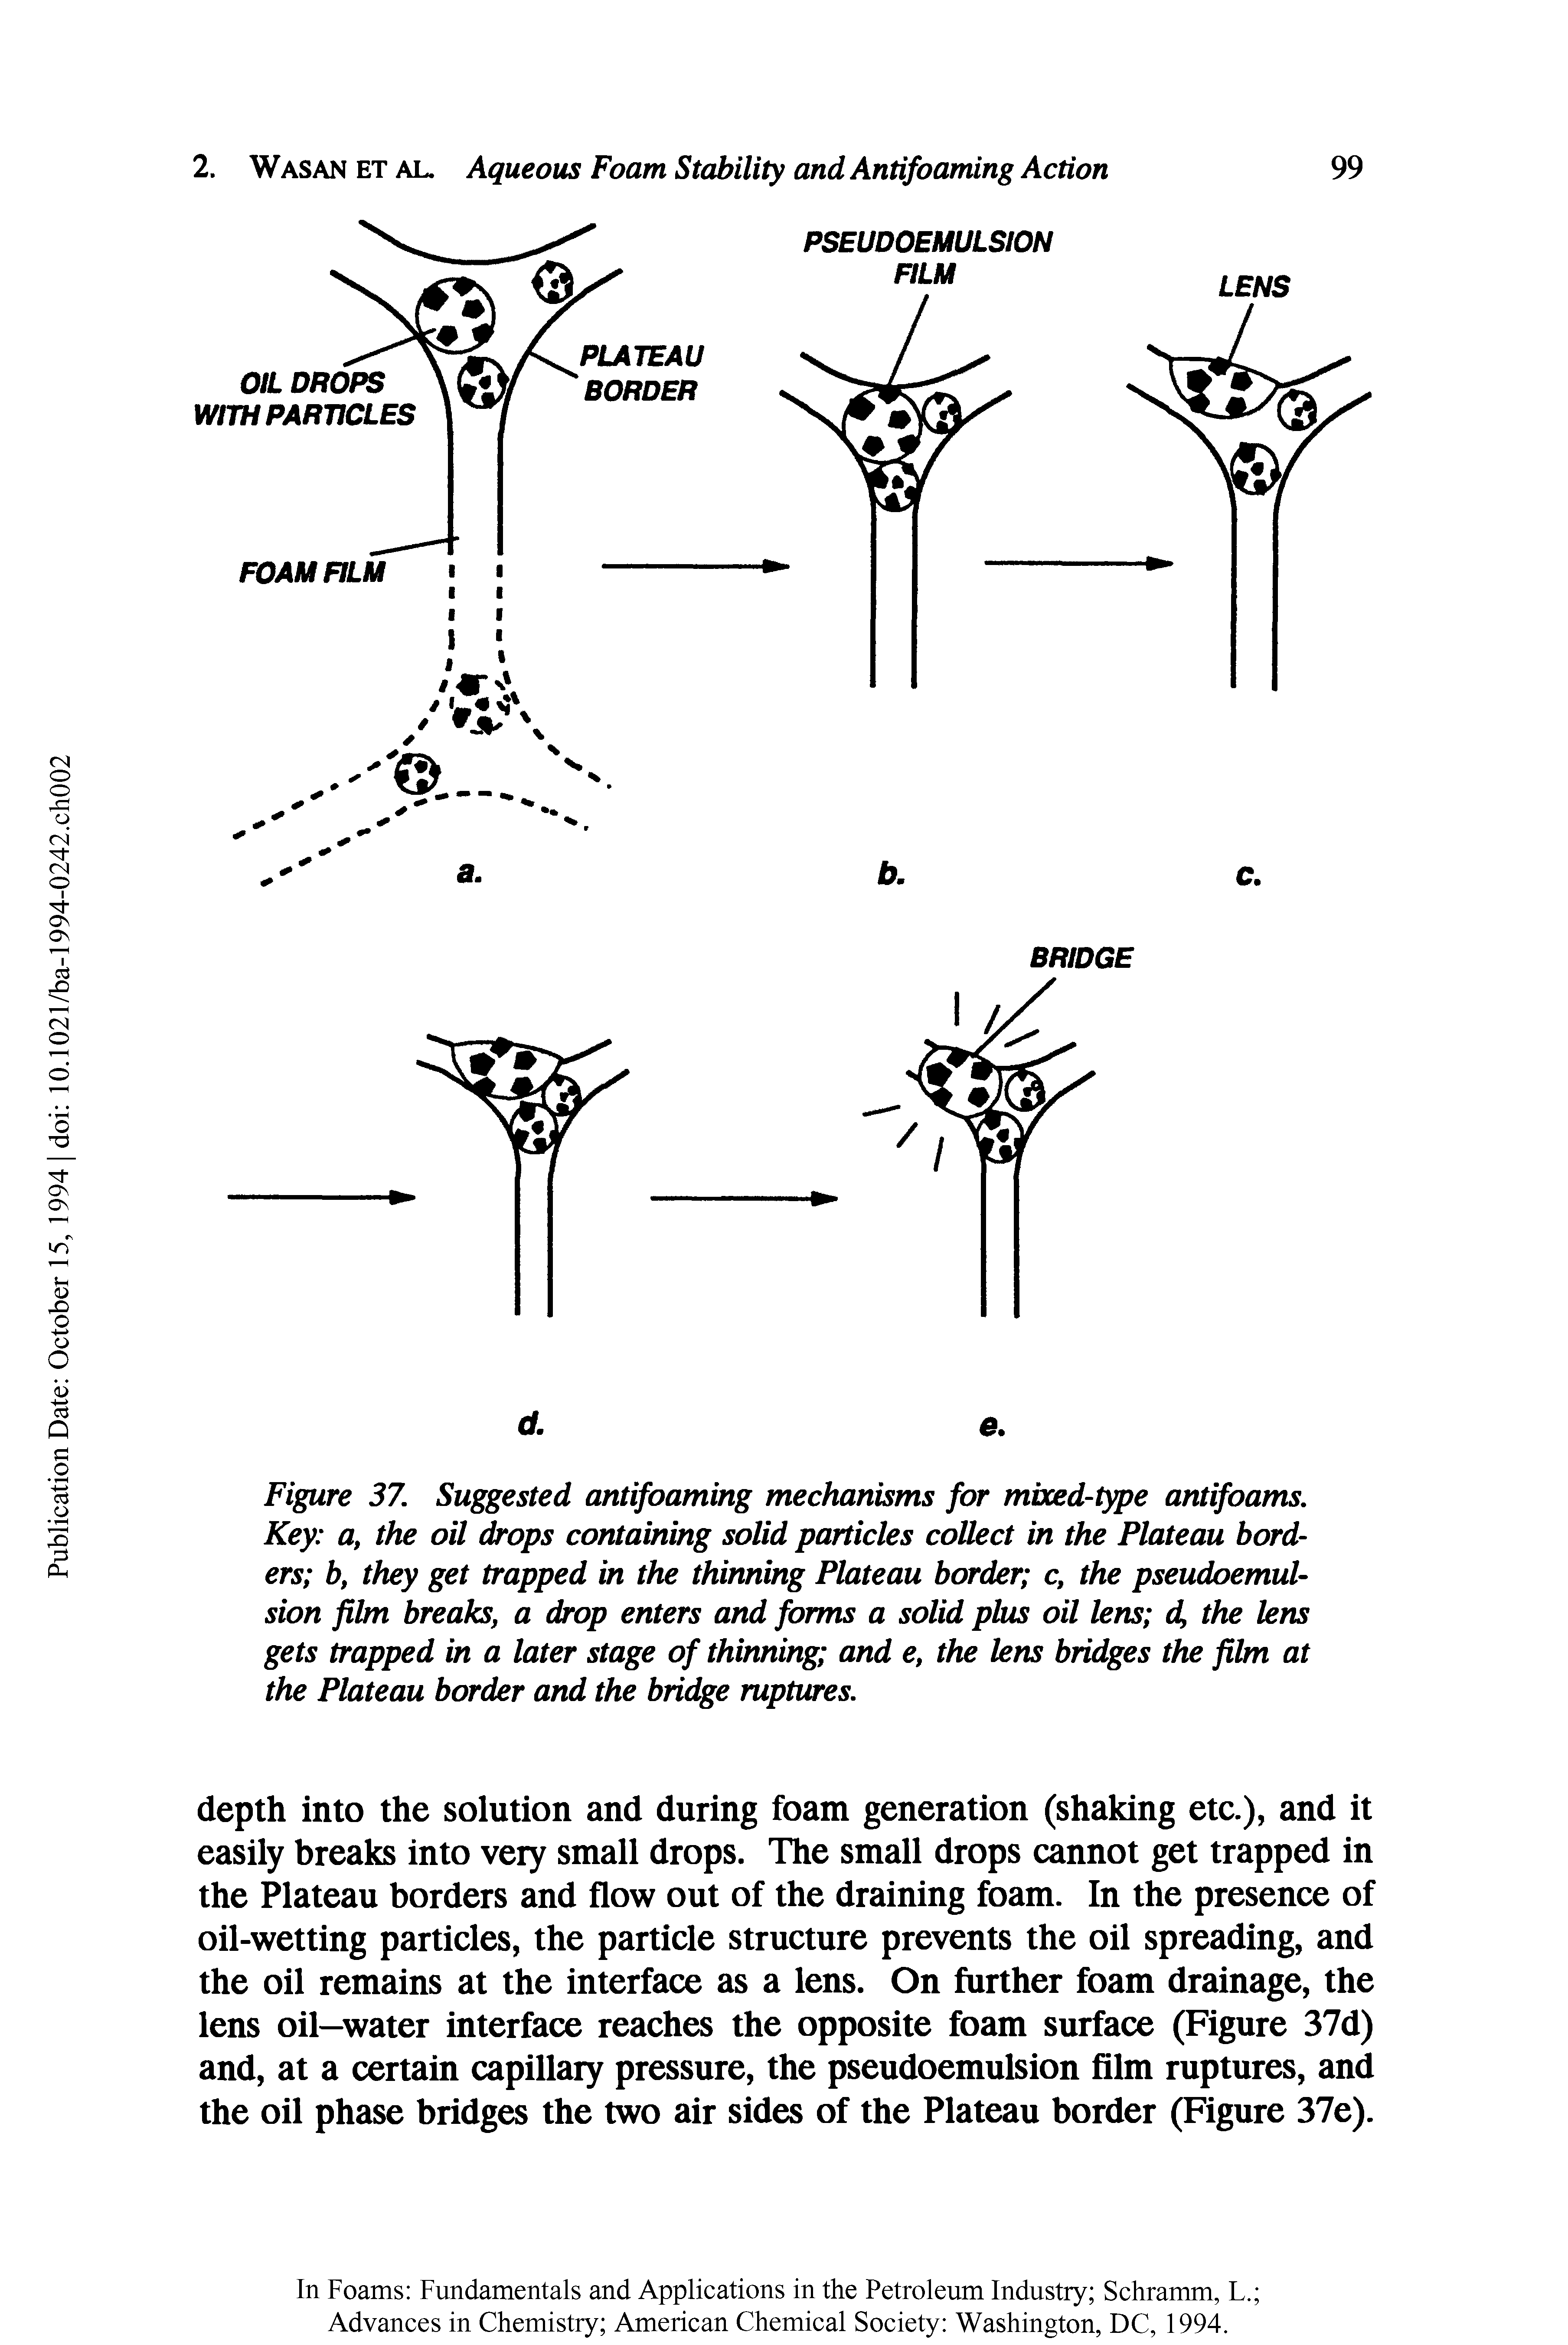 Figure 37. Suggested antifoaming mechanisms for mixed-type antifoams. Key a, the oil drops containing solid particles collect in the Plateau borders b, they get trapped in the thinning Plateau border c, the pseudoemulsion film breaks, a drop enters and forms a solid phis oil lens d, the lens gets trapped in a later stage of thinning and e, the lens bridges the film at the Plateau border and the bridge ruptures.